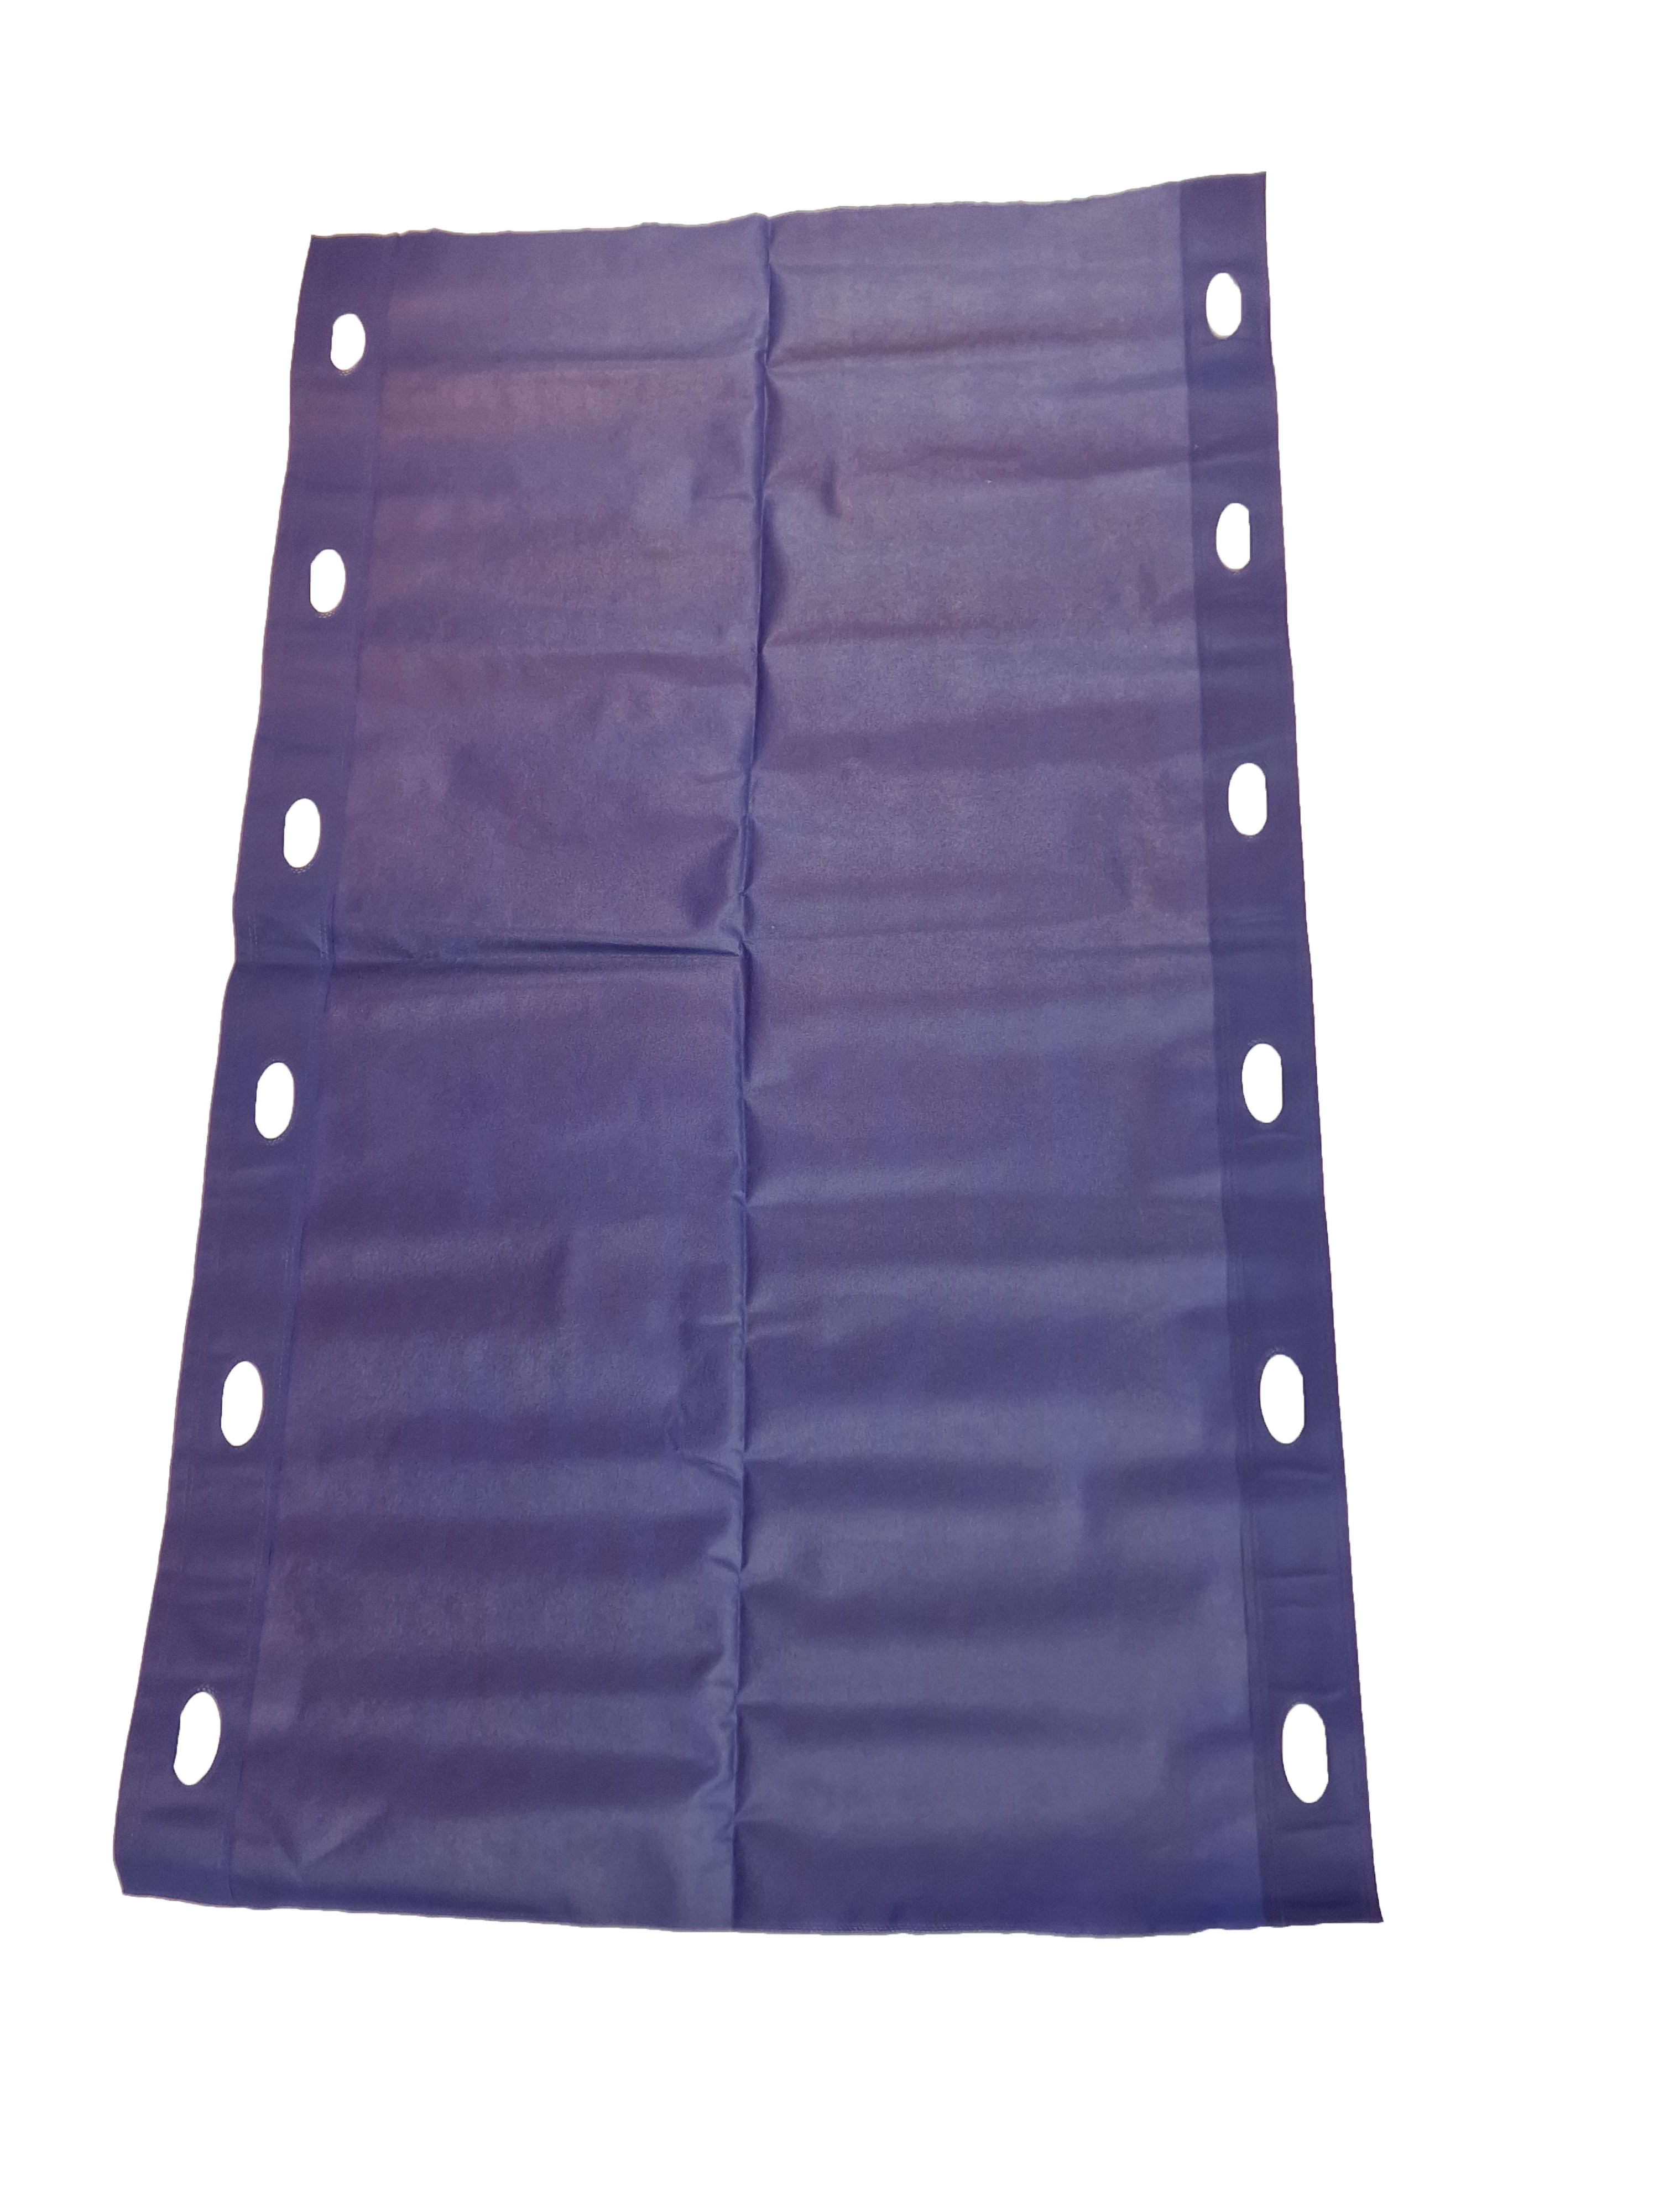 Disposable Transfer-Pad, blue, with 12 Handels, only for transfer, extra strong laminated, tearproof, water resistant, individually packed, only for single use

Material:
PP-nonwoven 130g/m2 Size: 195 x 115 cm
Unit: 44 pcs./ctn – 20 VE/Pallet
Cartonsize: 60x40x40 cm
Net weight: 15 kg Gross weight: 16 kg